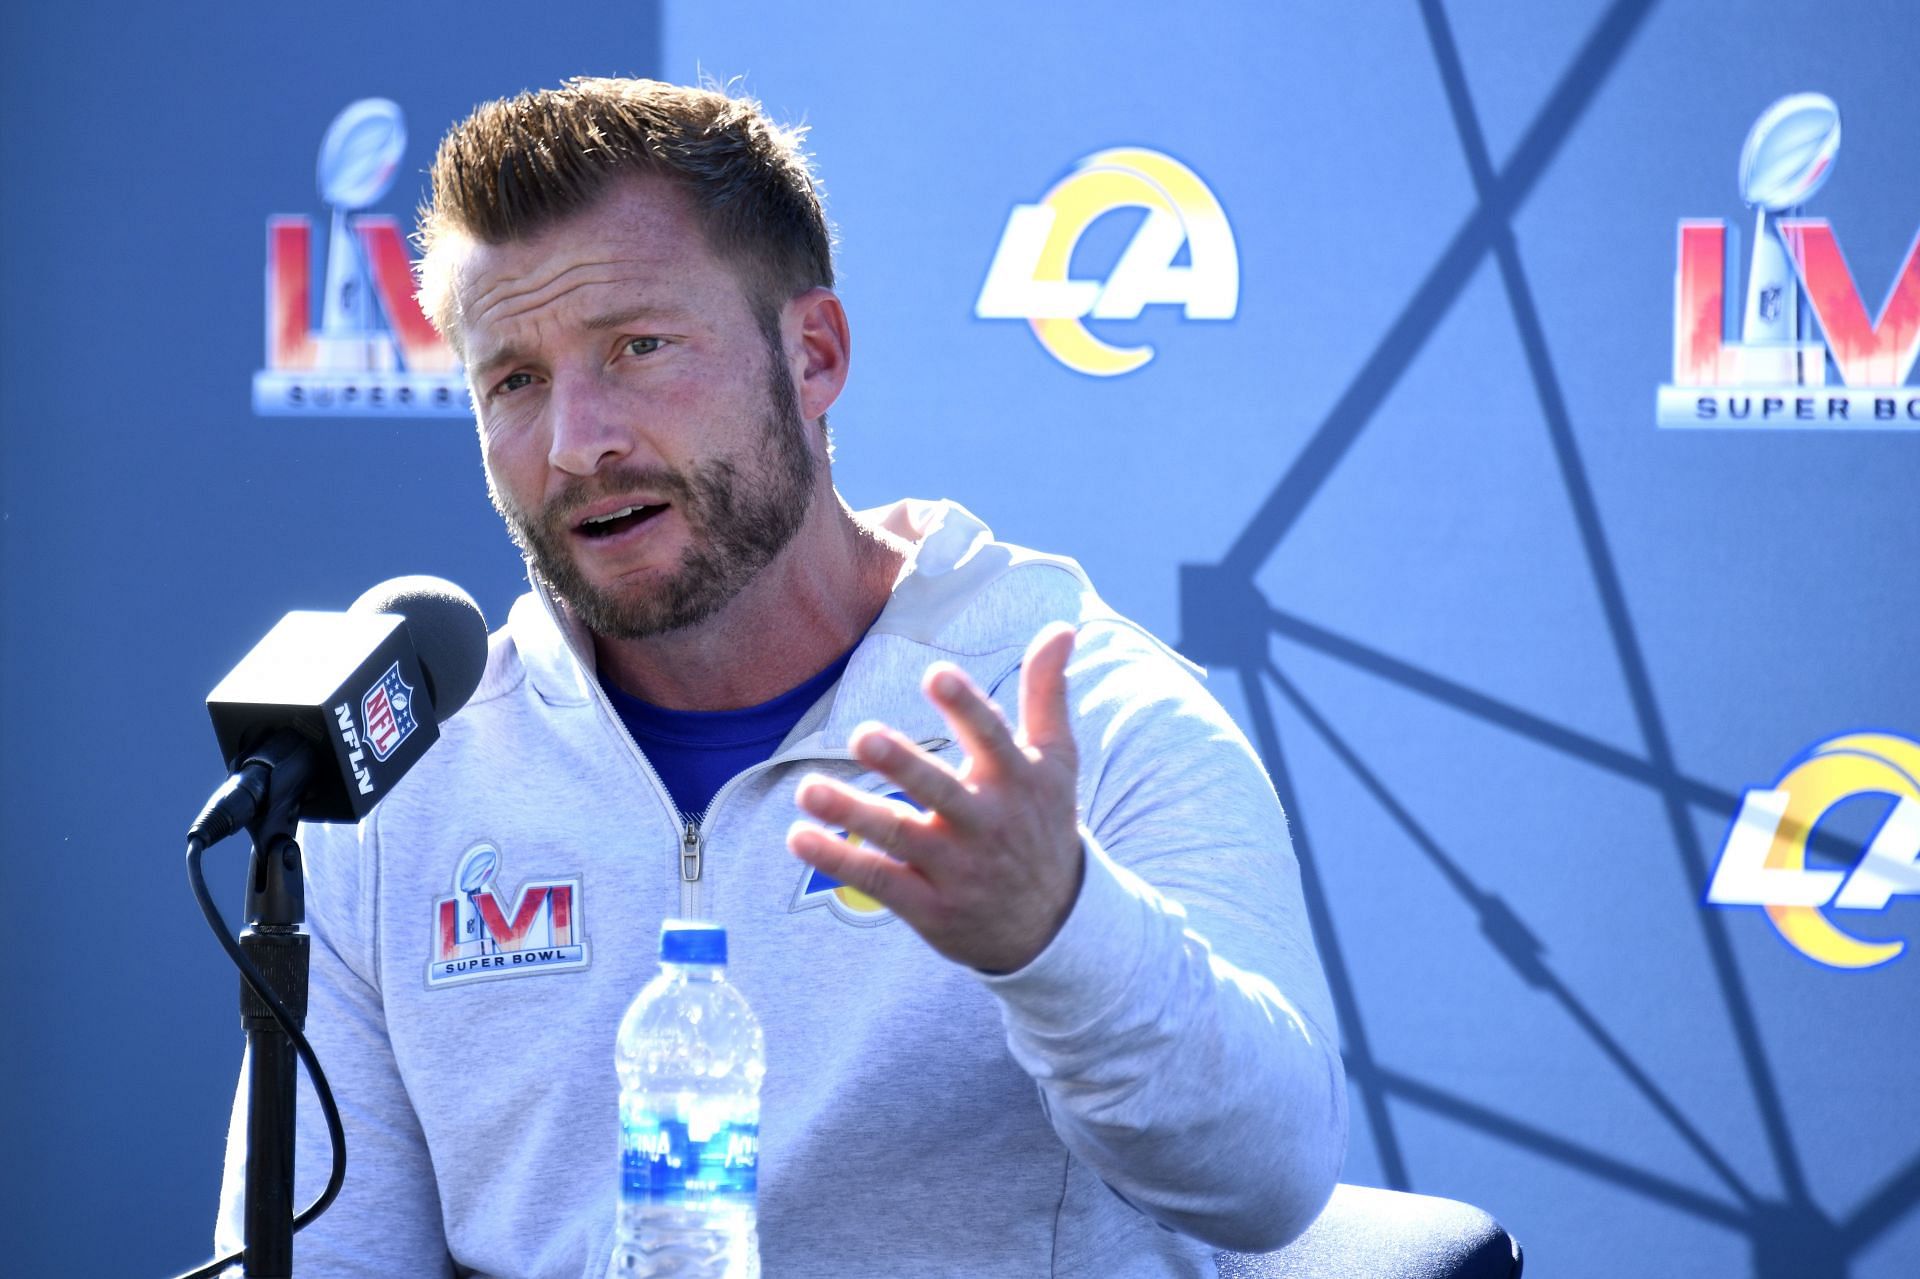 Sean McVay spurns potential  offer to stay with Rams